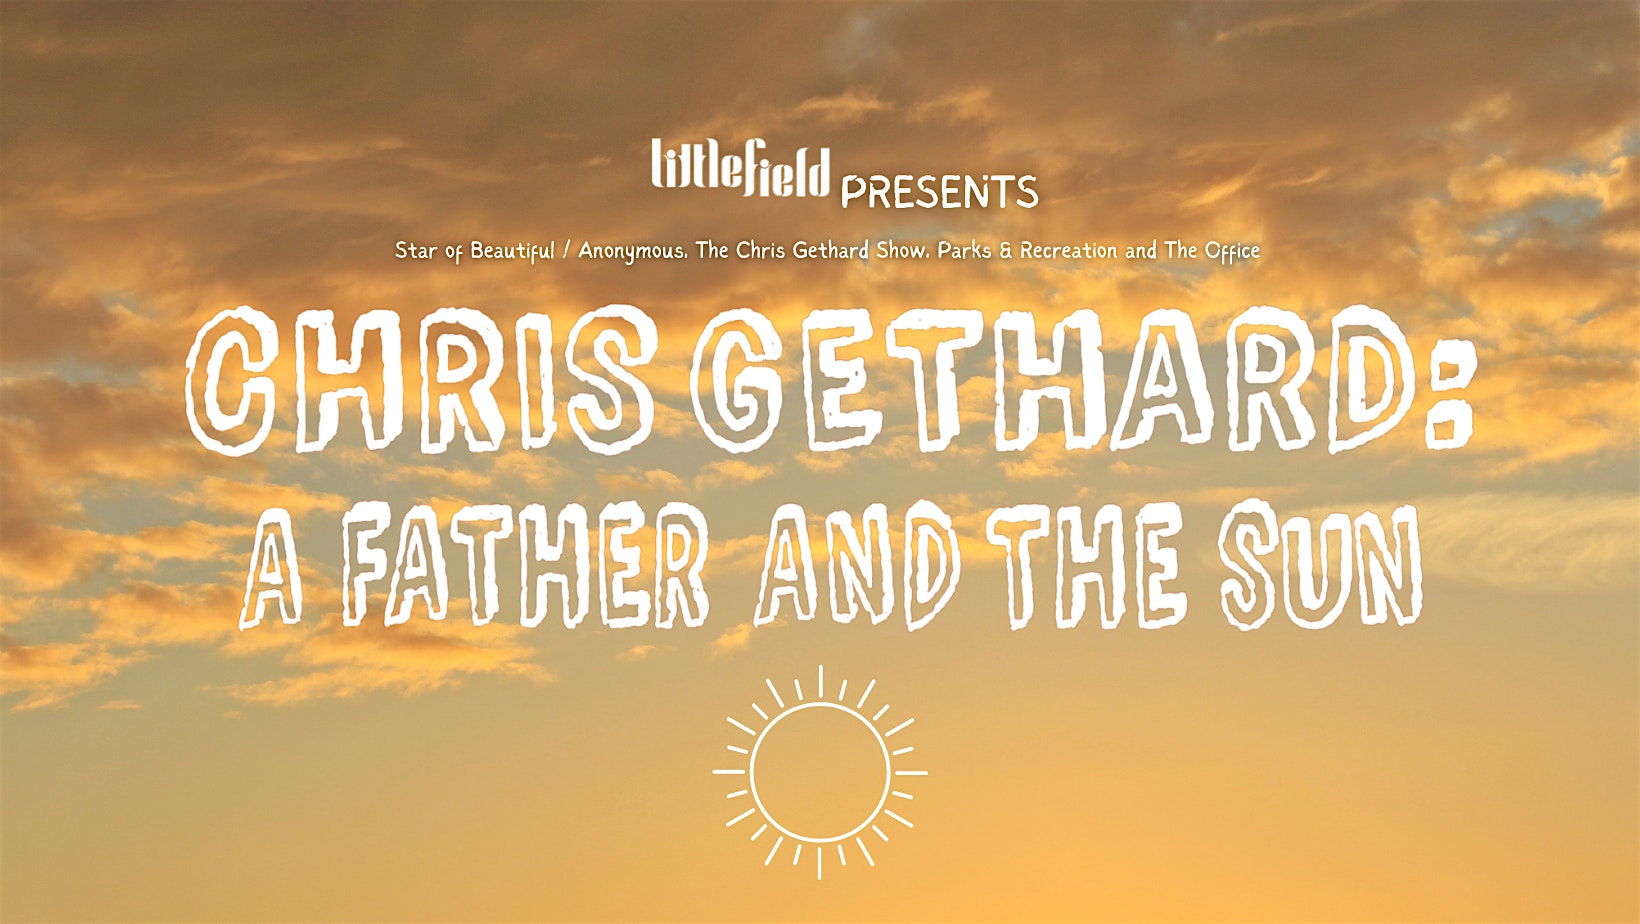 Chris Gethard: A Father and The Sun